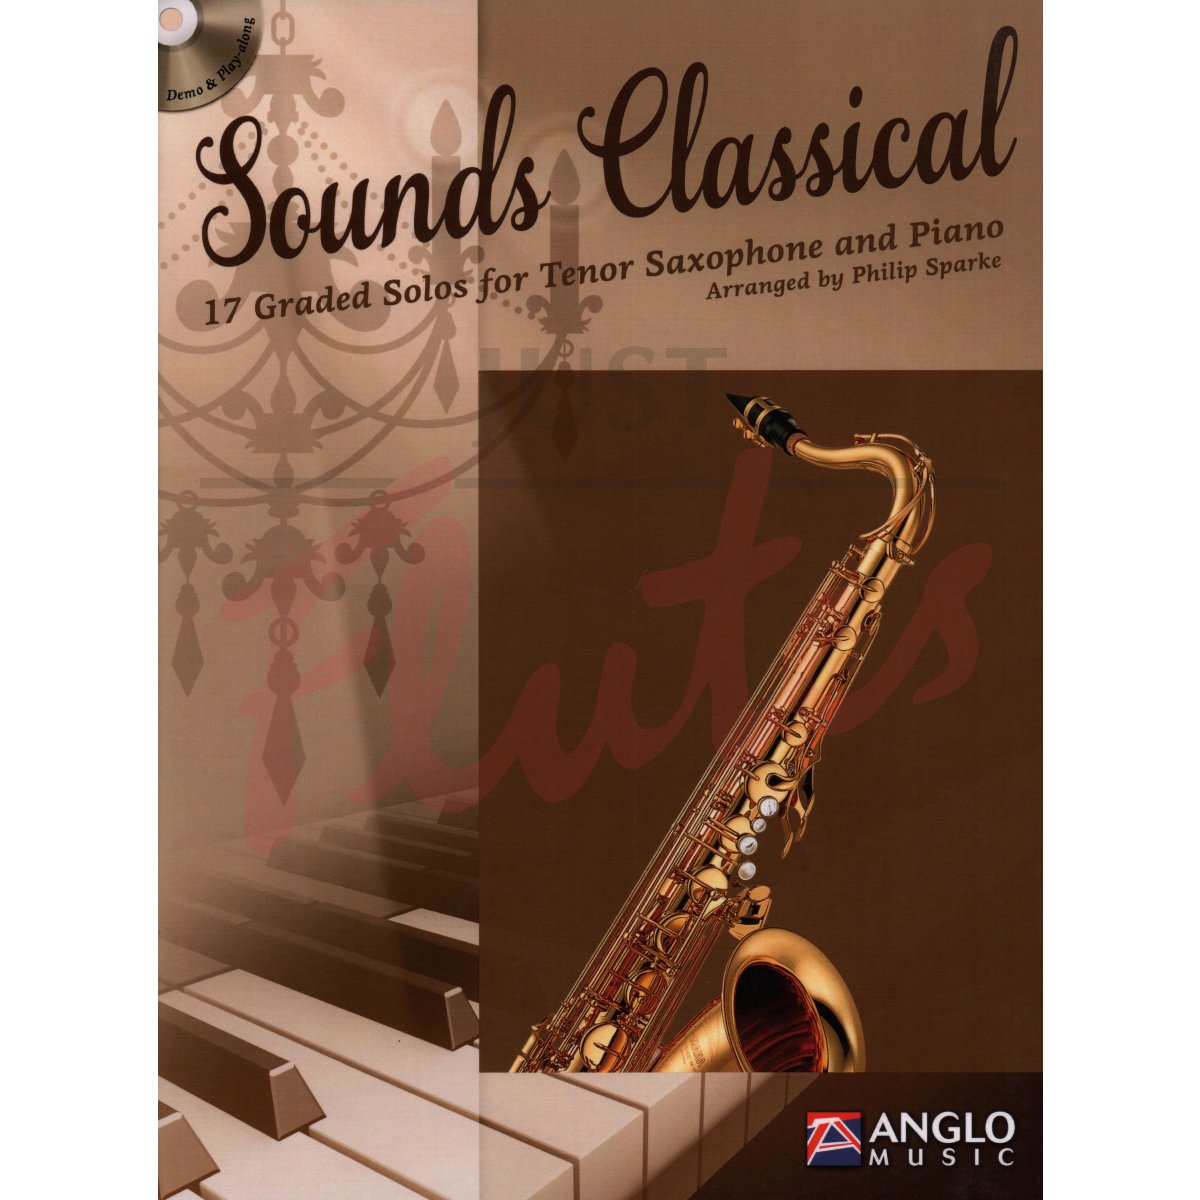 Sounds Classical for Tenor Saxophone and Piano